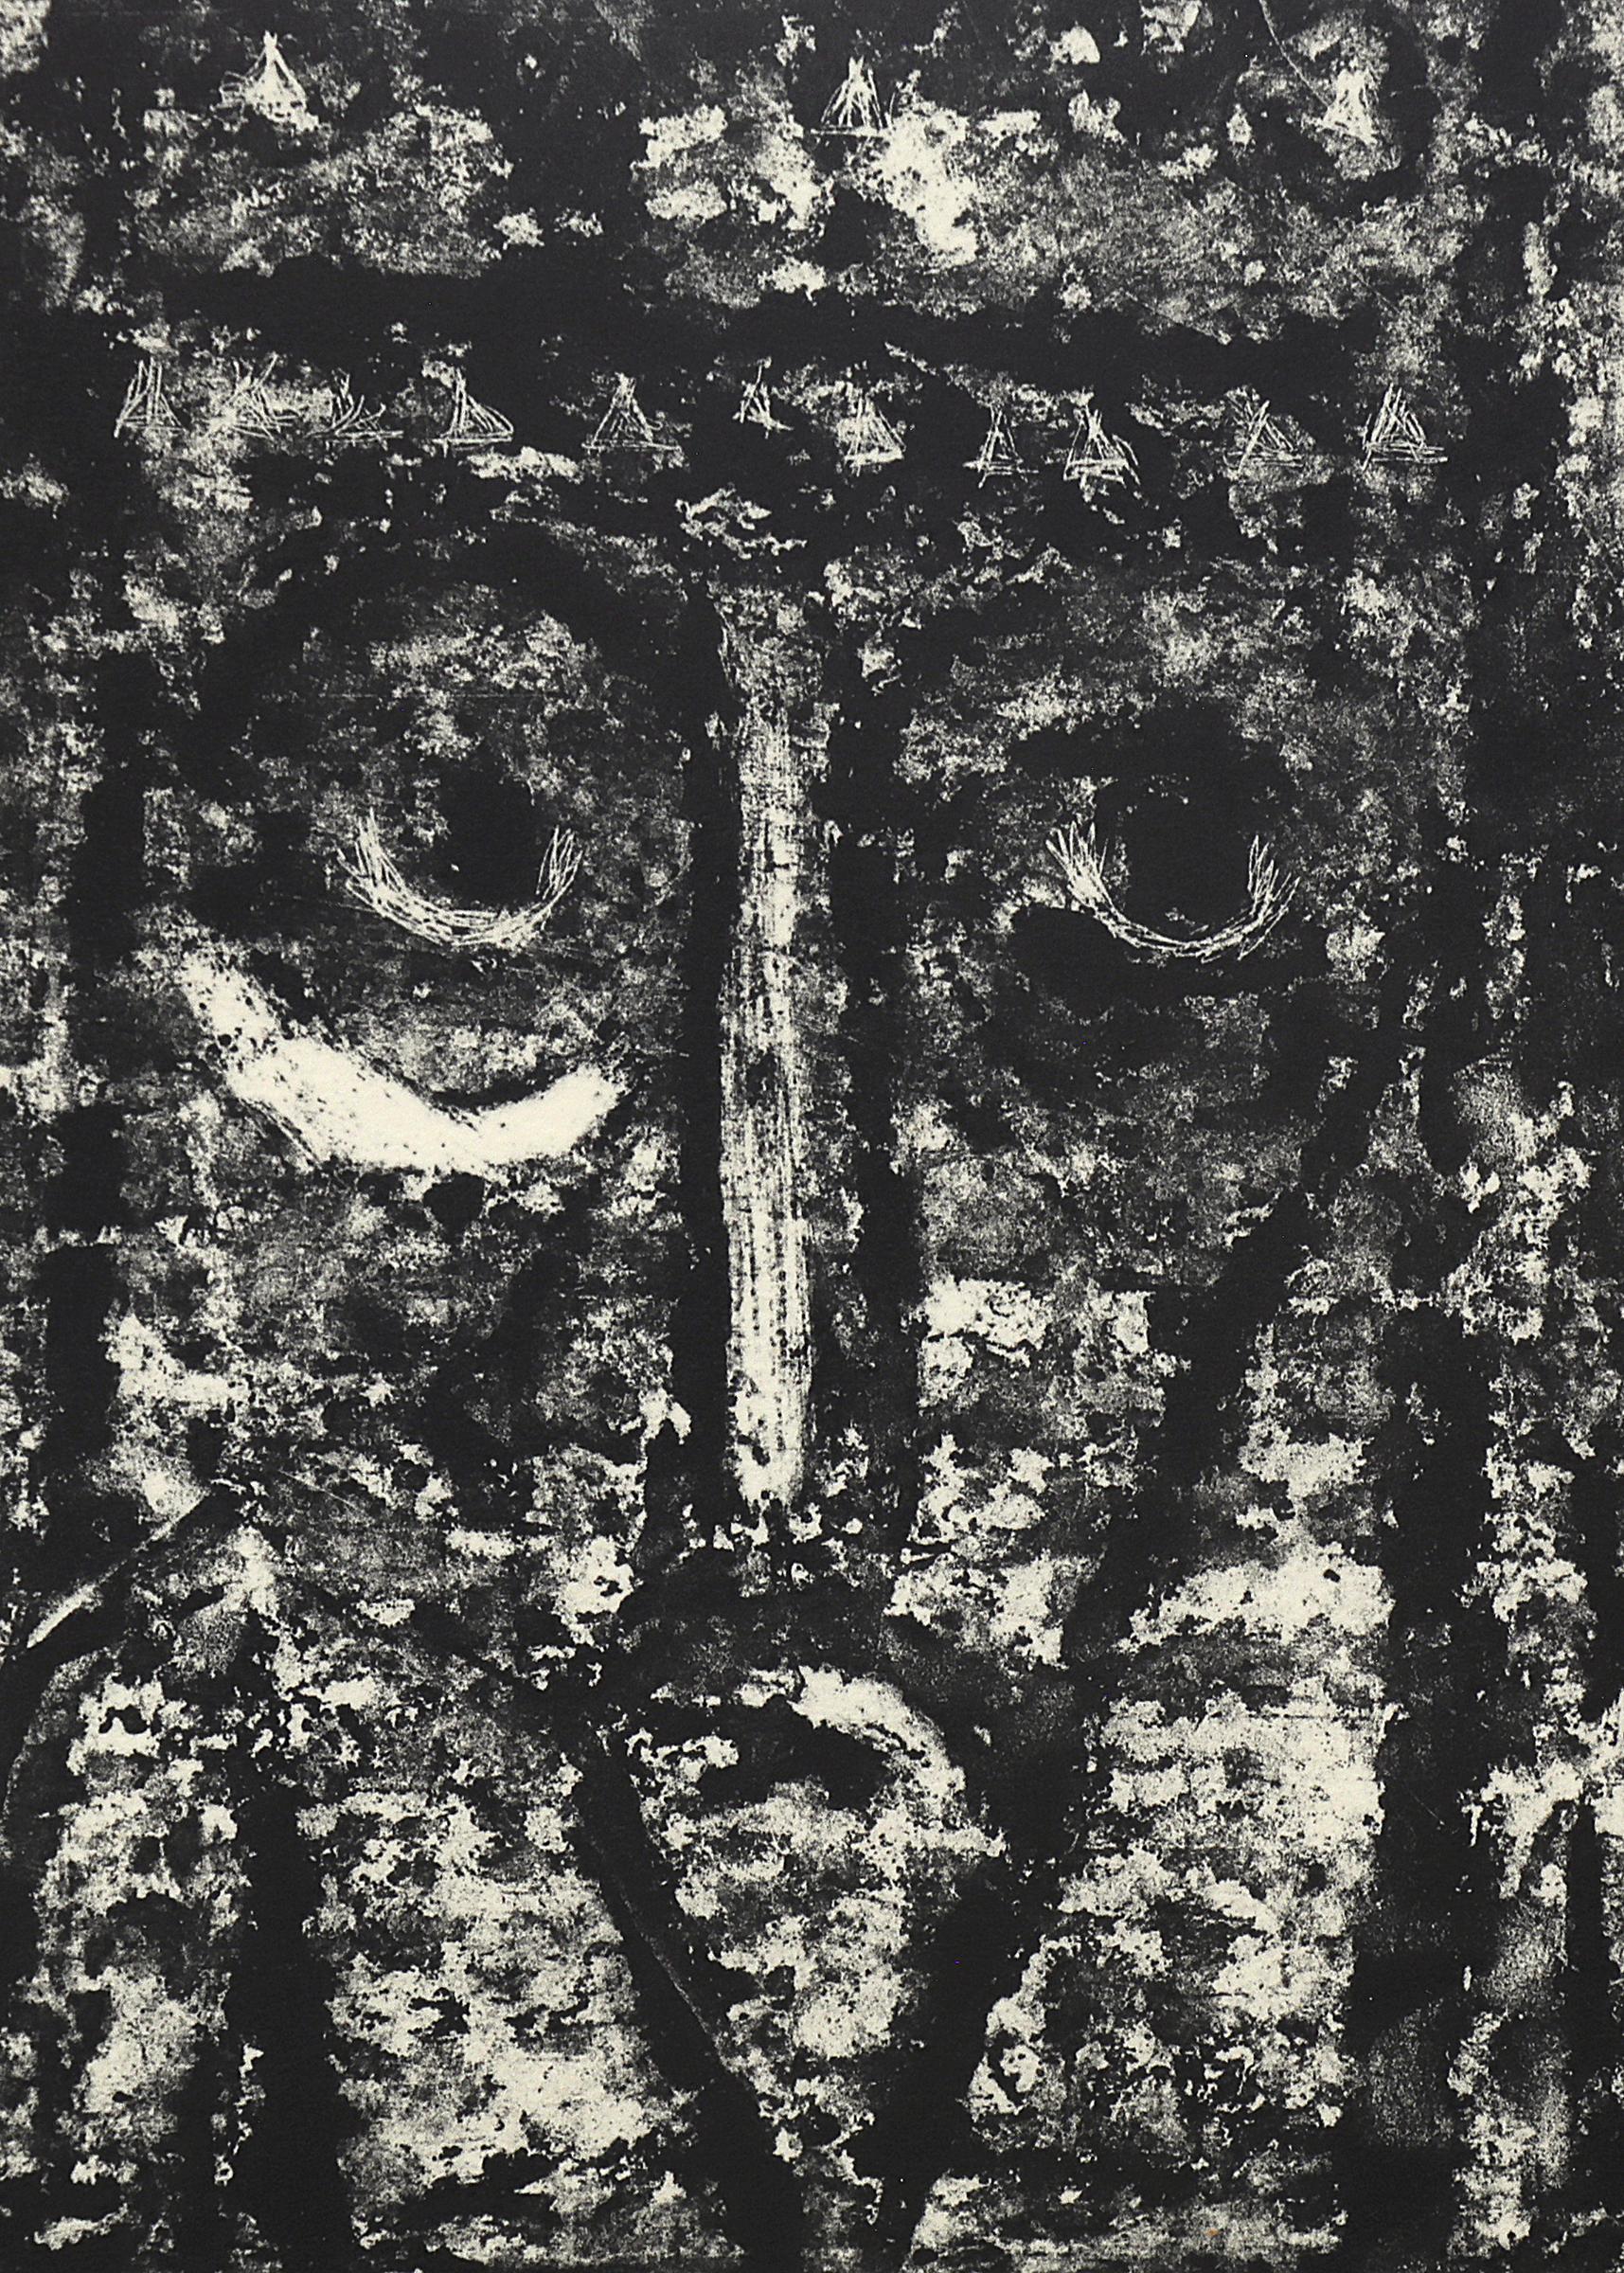 Three Kings (4/15), Lithograph on Paper of Three Figure Heads, Black and White 5